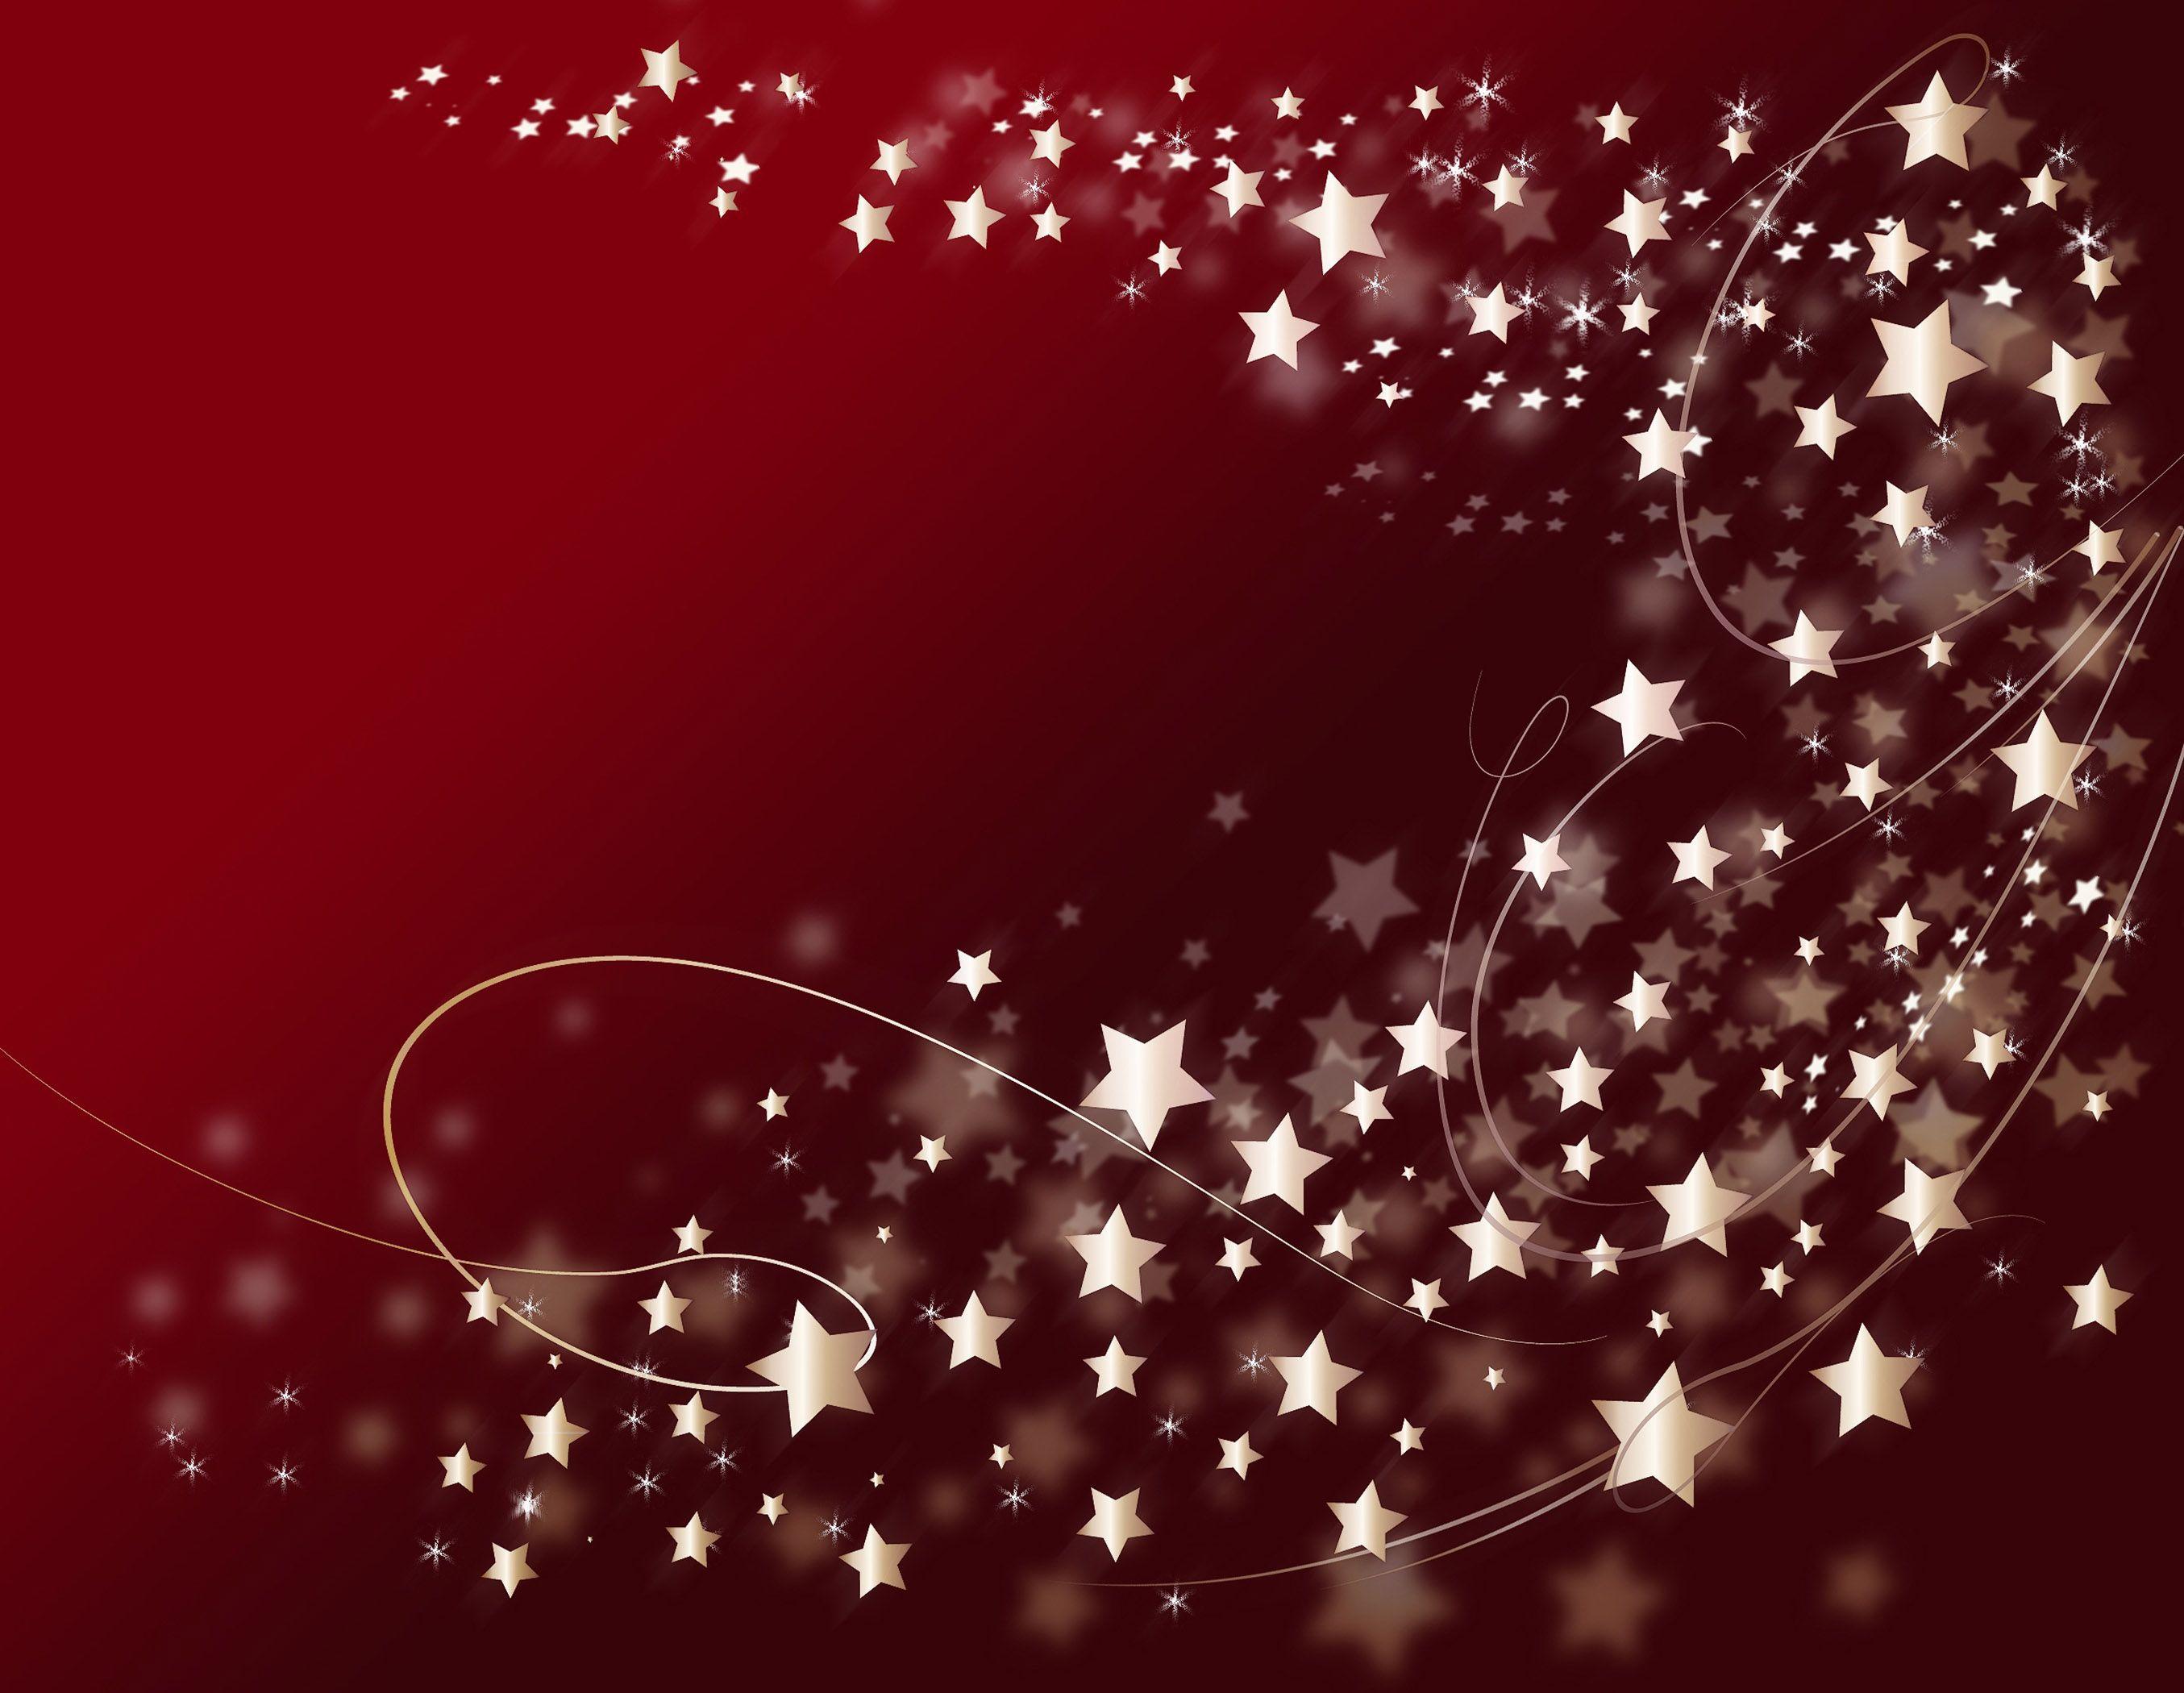 Stars at Xmas Background Image, Cards or Christmas Wallpaper